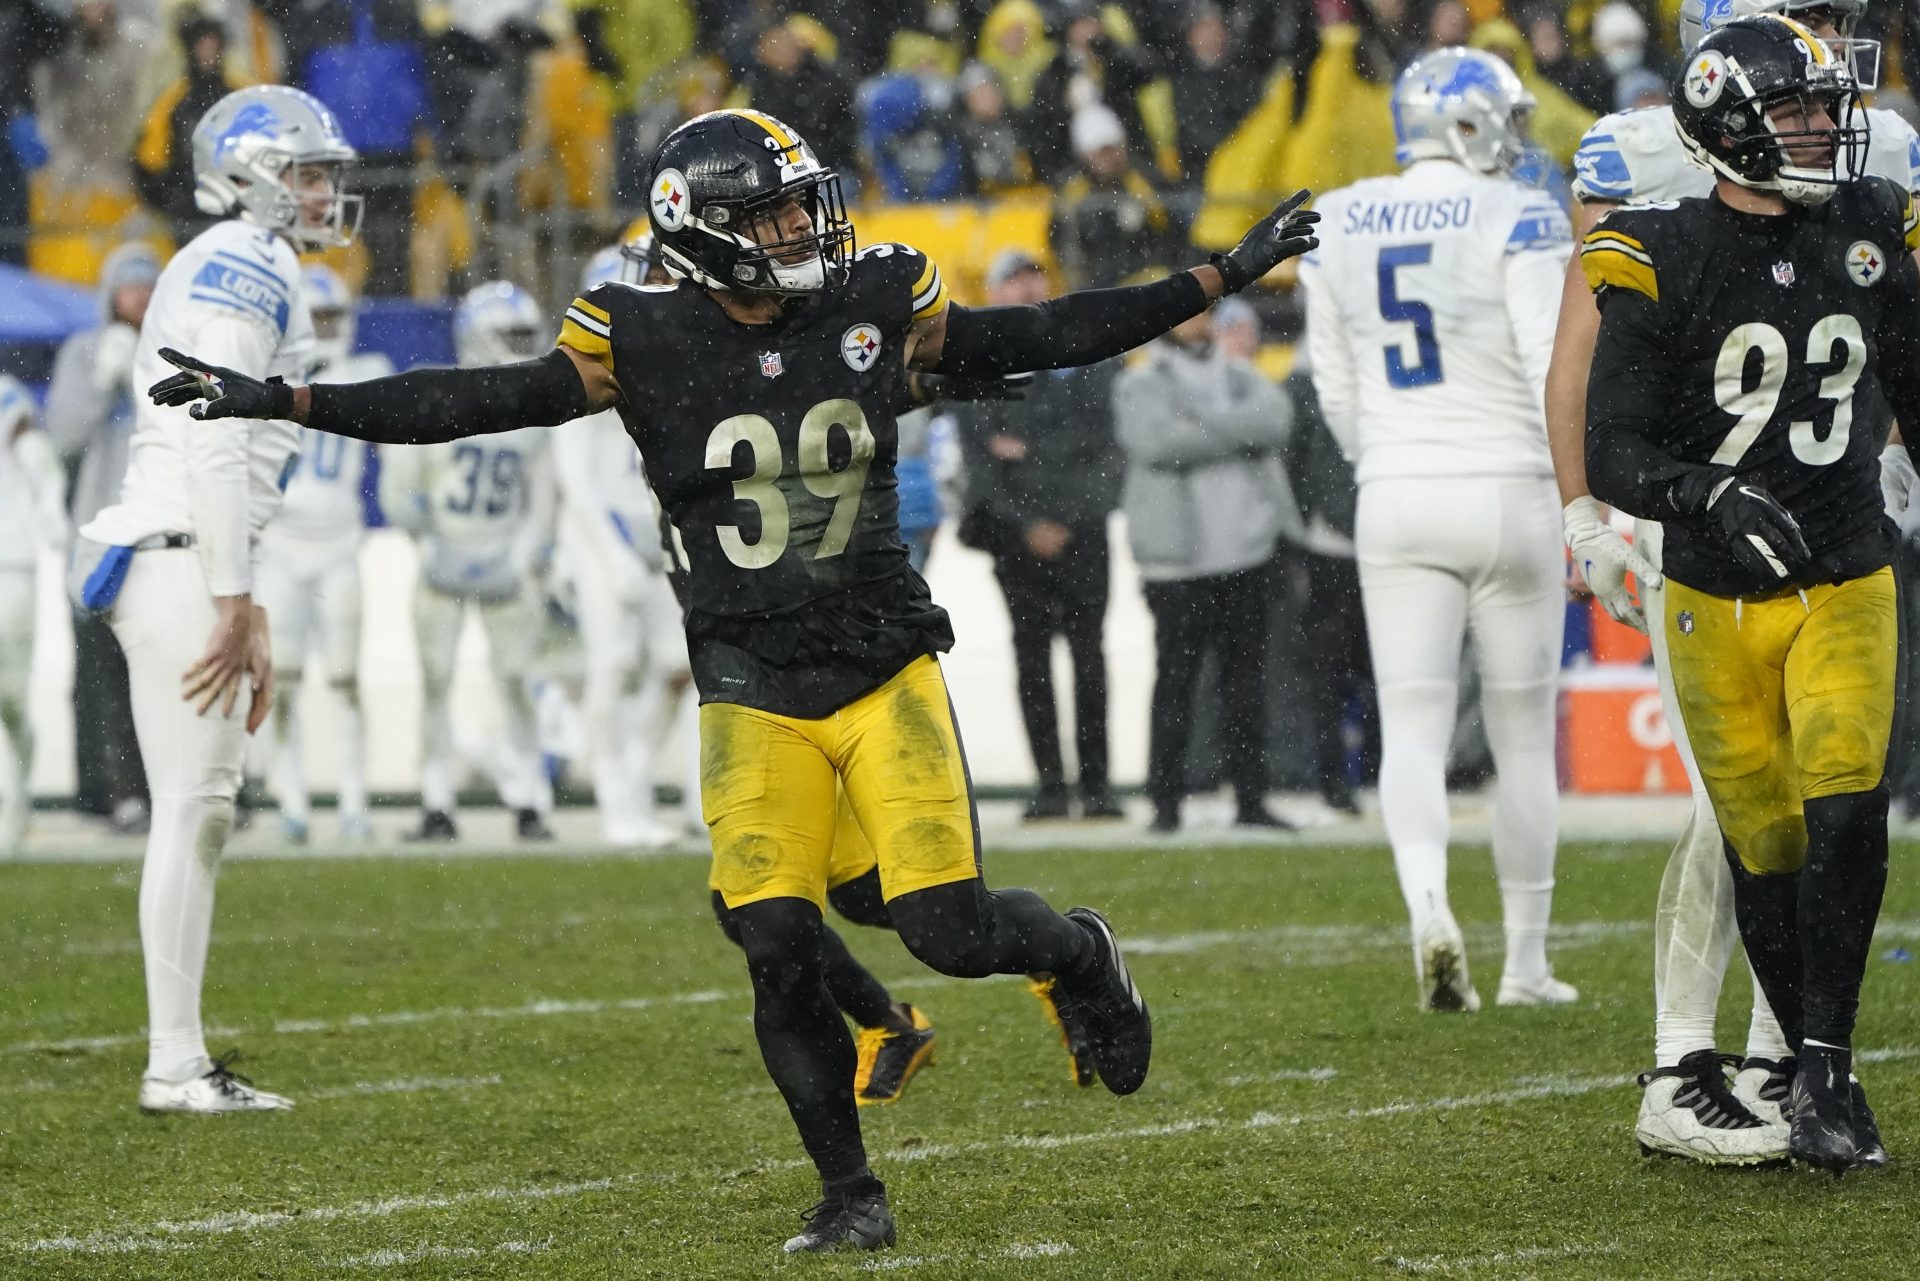 Detroit Lions kicker Ryan Santoso (5) walks off the field after missing a field goal-attempt, as Pittsburgh Steelers free safety Minkah Fitzpatrick (39) celebrates during the overtime period of an NFL football game, Sunday, Nov. 14, 2021, in Pittsburgh.